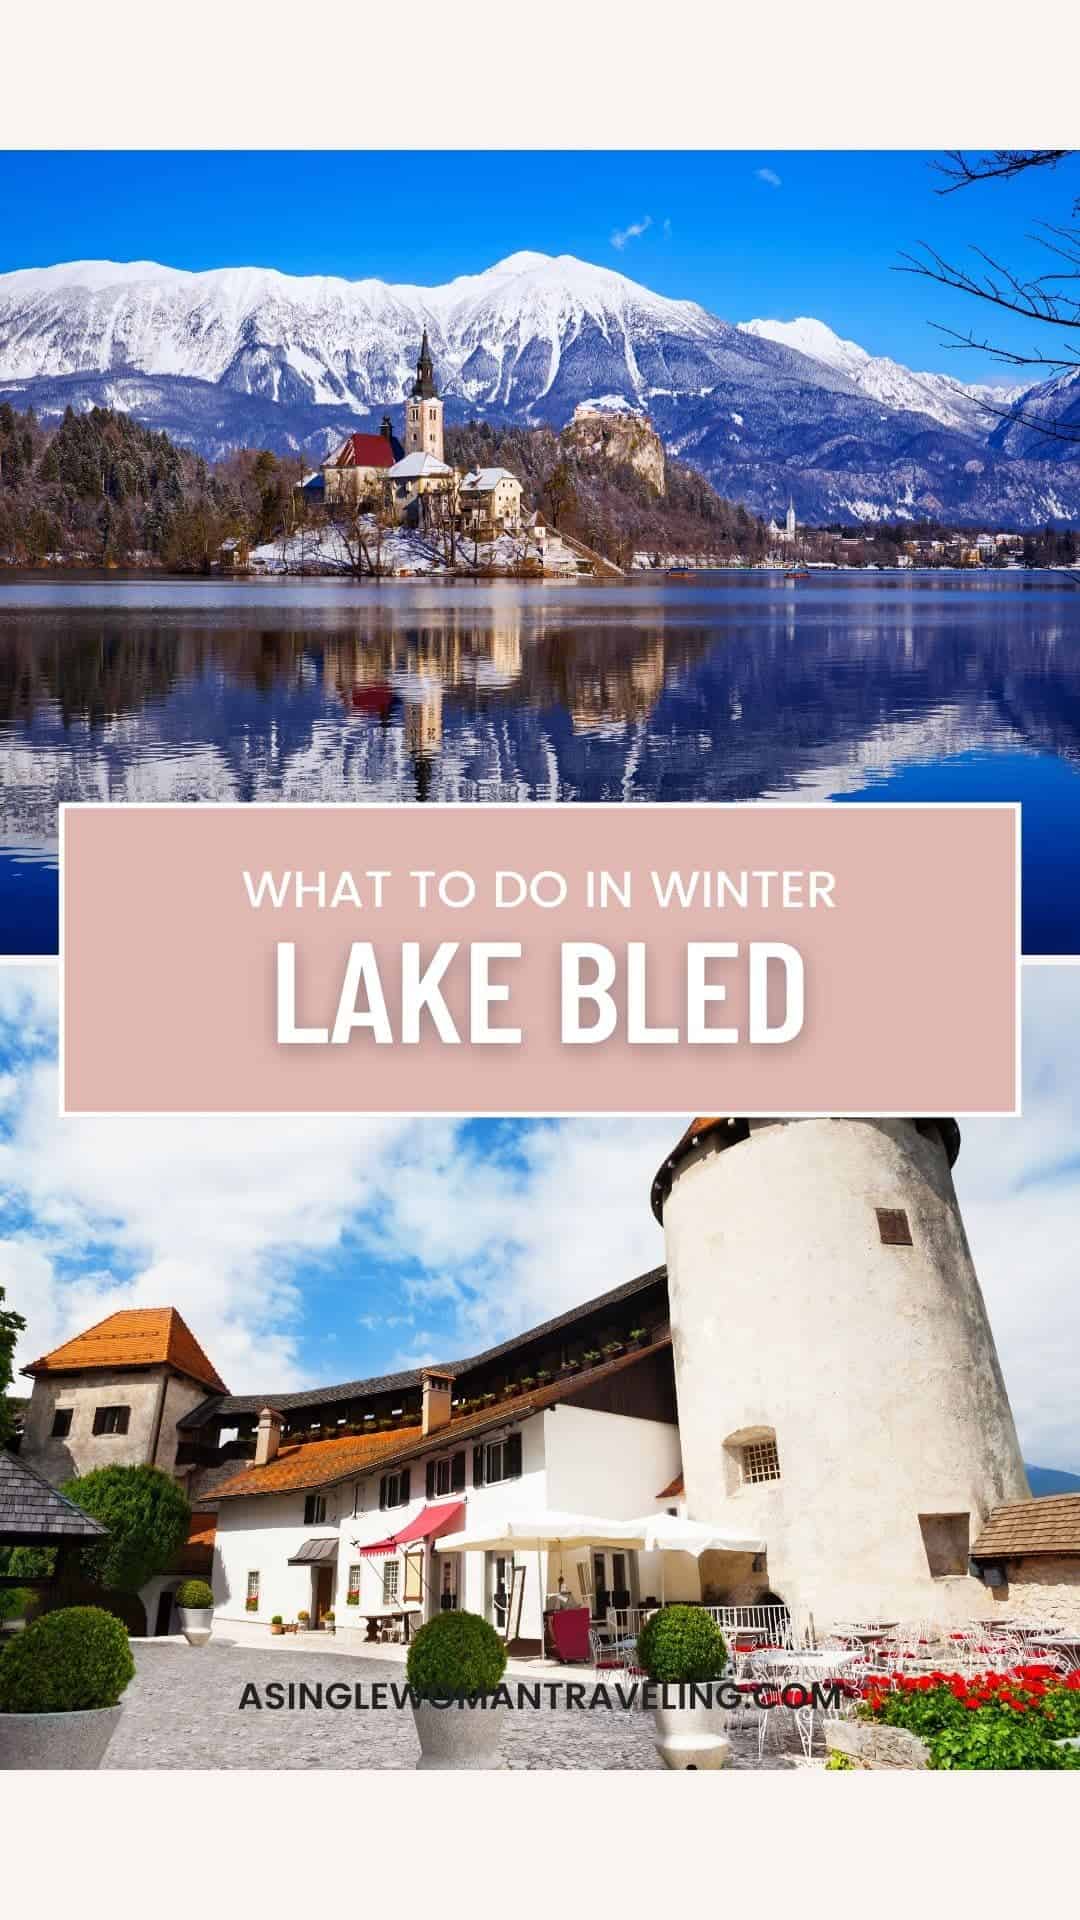 The picturesque winter landscape of Lake Bled, featuring the church on the island and Bled Castle perched atop a rocky cliff, all under a bright blue sky